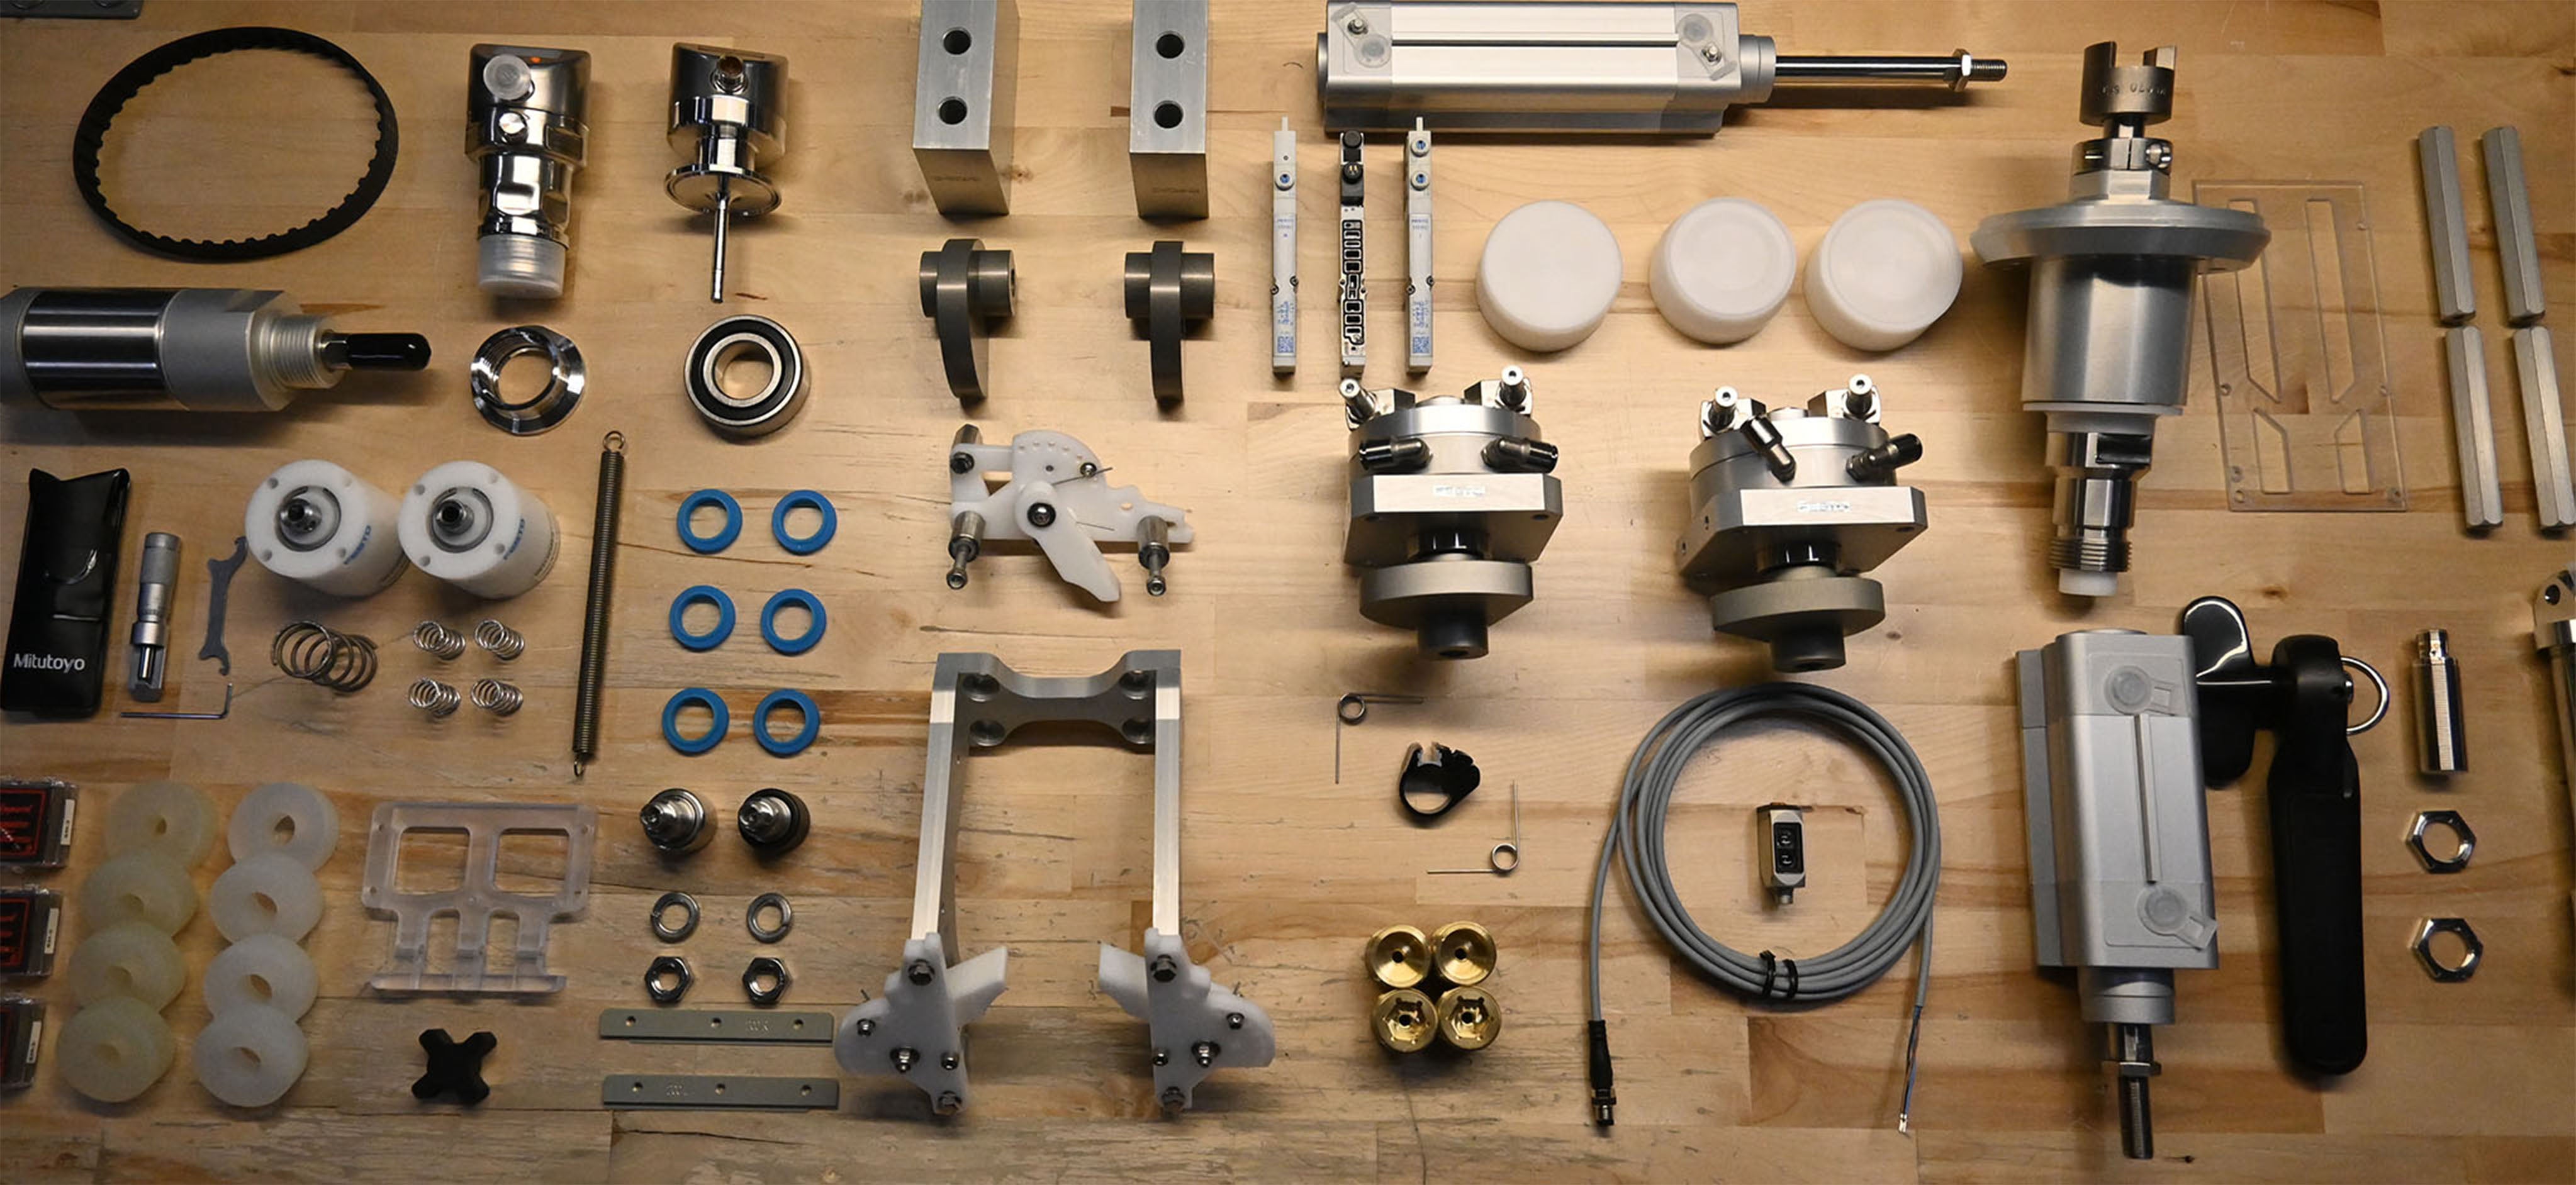 An assortment of parts methodically placed on a wooden work table.